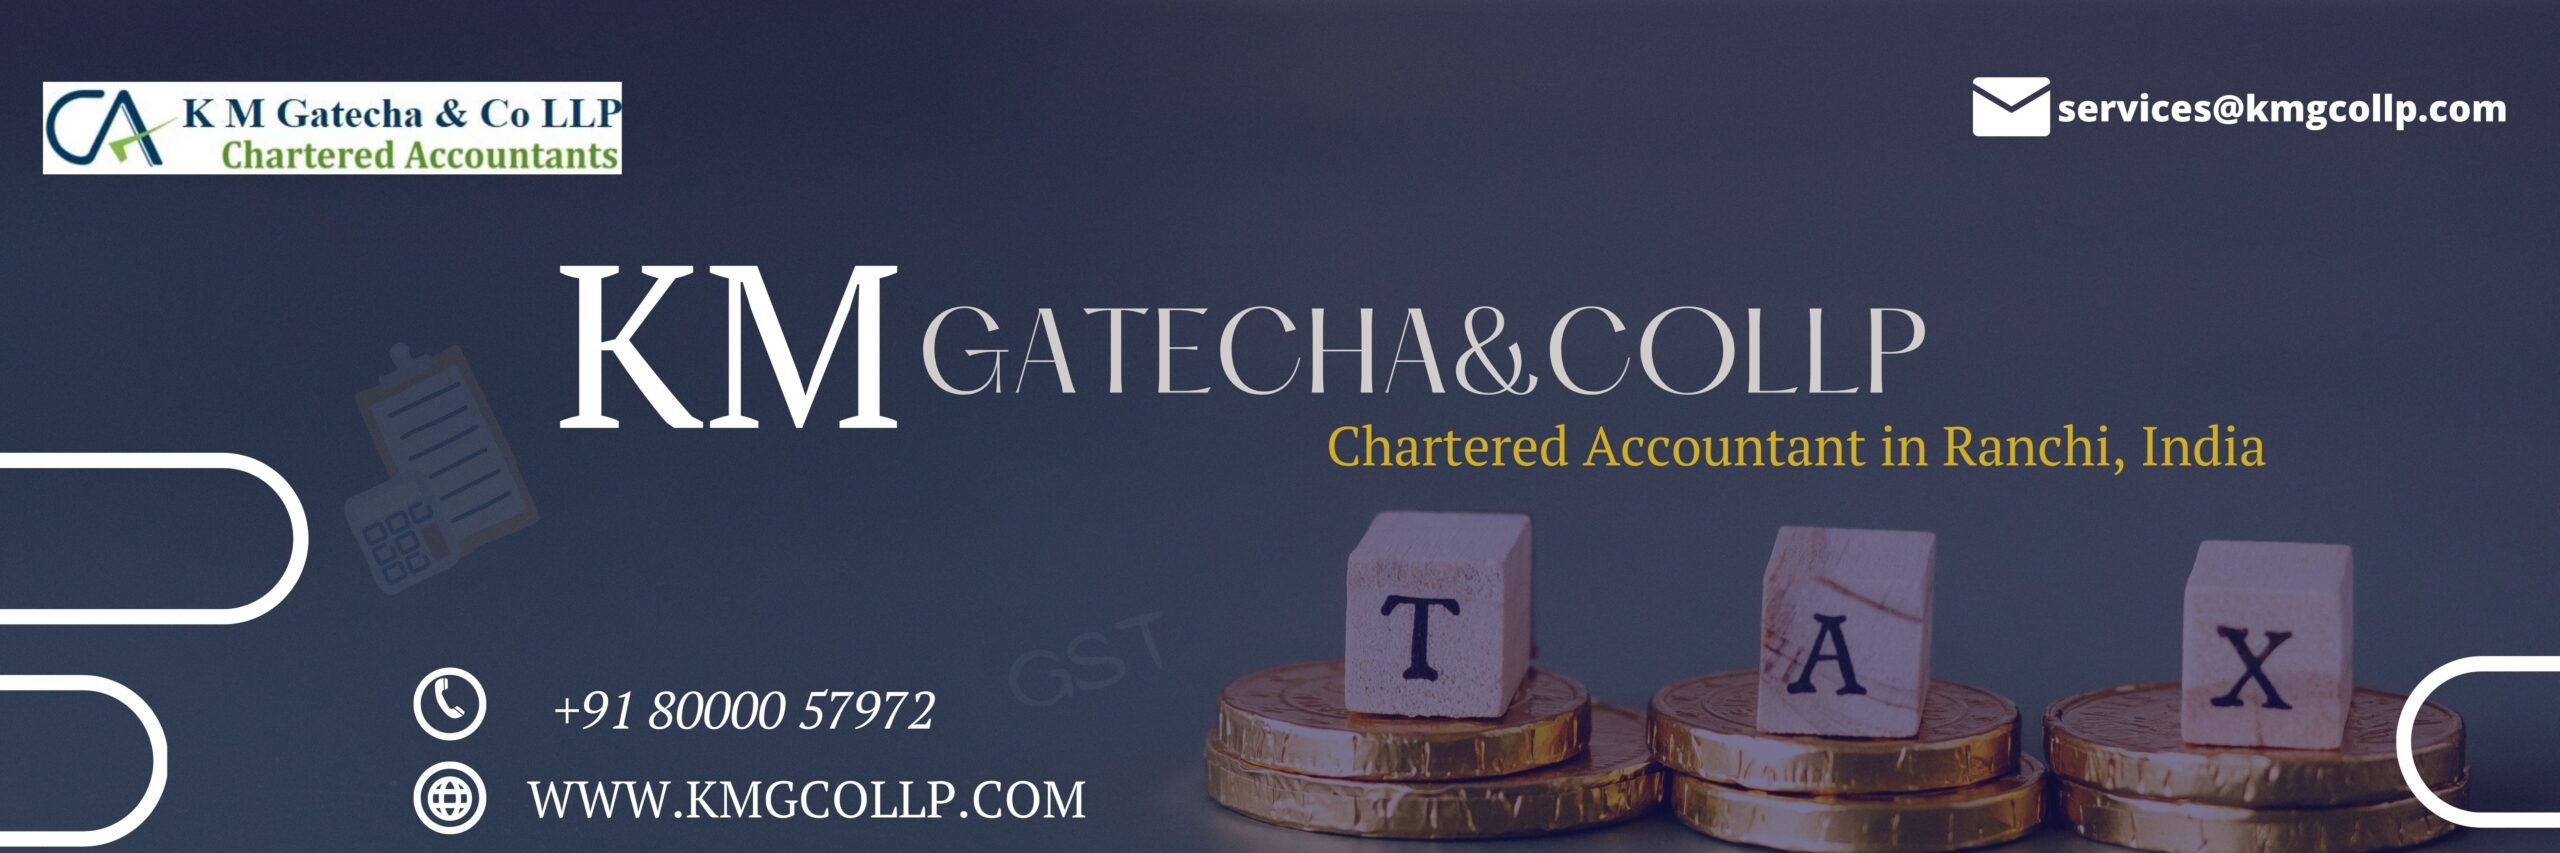 ca chartered accountant in ranchi, india